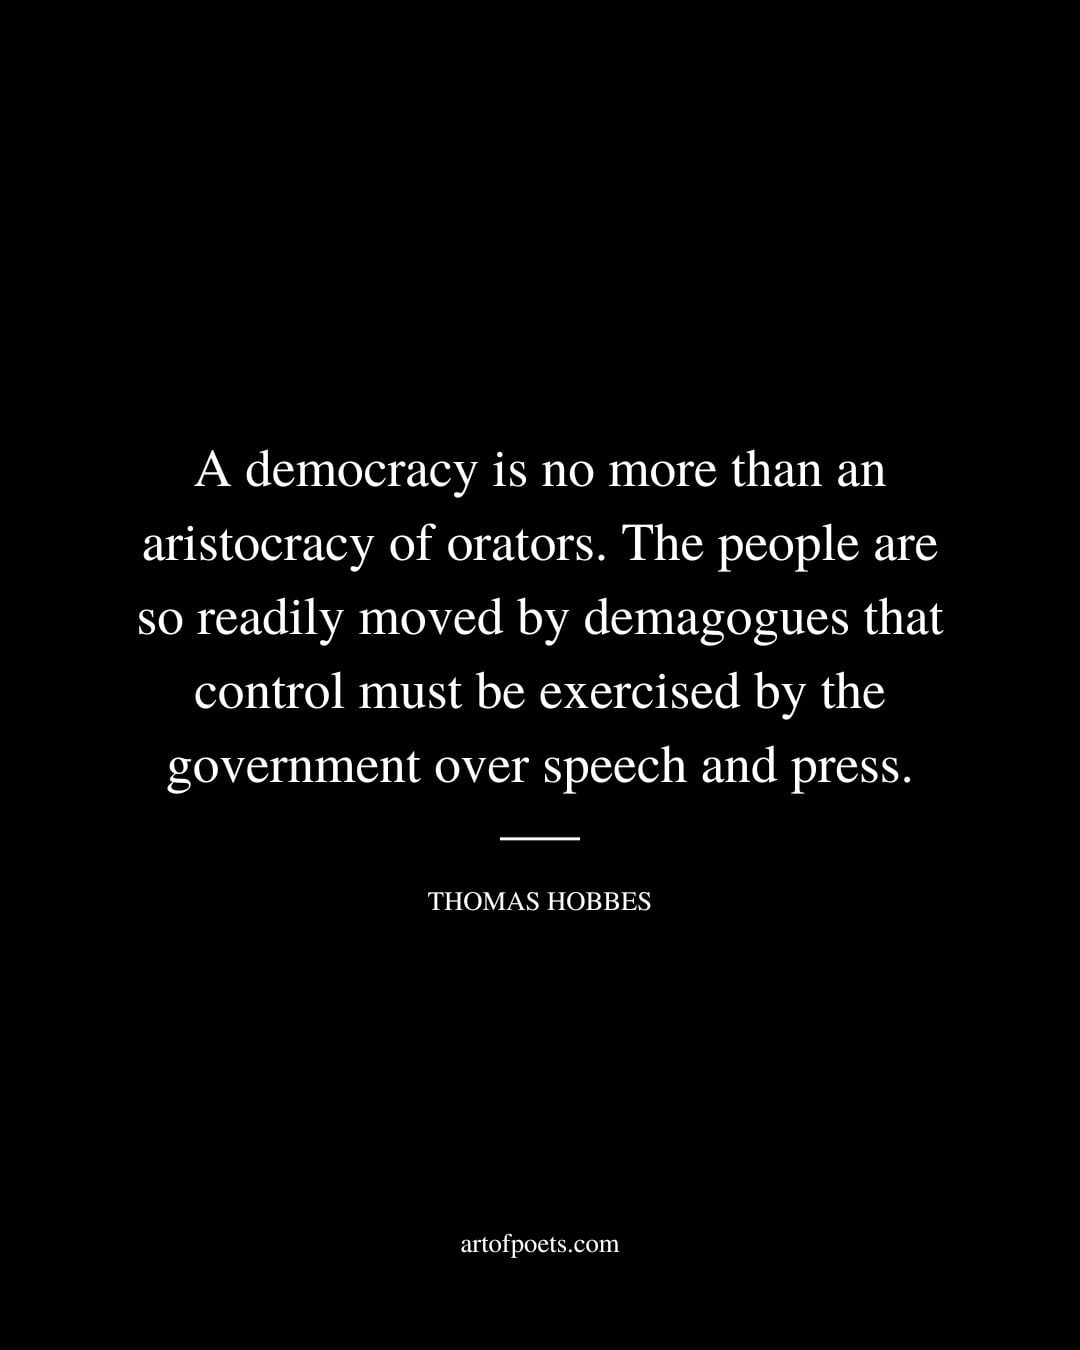 A democracy is no more than an aristocracy of orators. The people are so readily moved by demagogues that control must be exercised by the government over speech and press